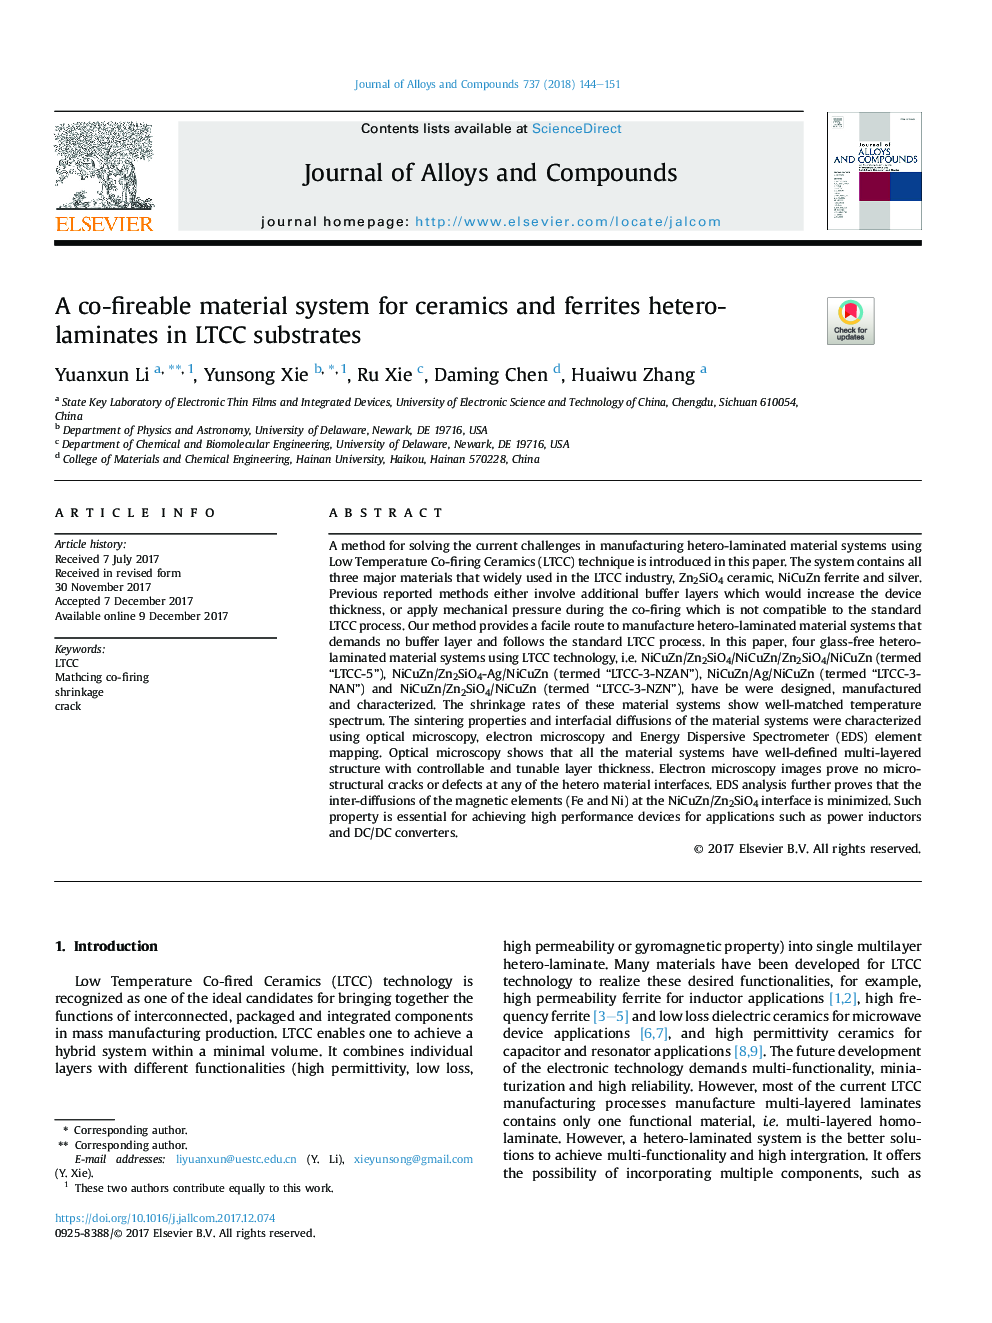 A co-fireable material system for ceramics and ferrites hetero-laminates in LTCC substrates